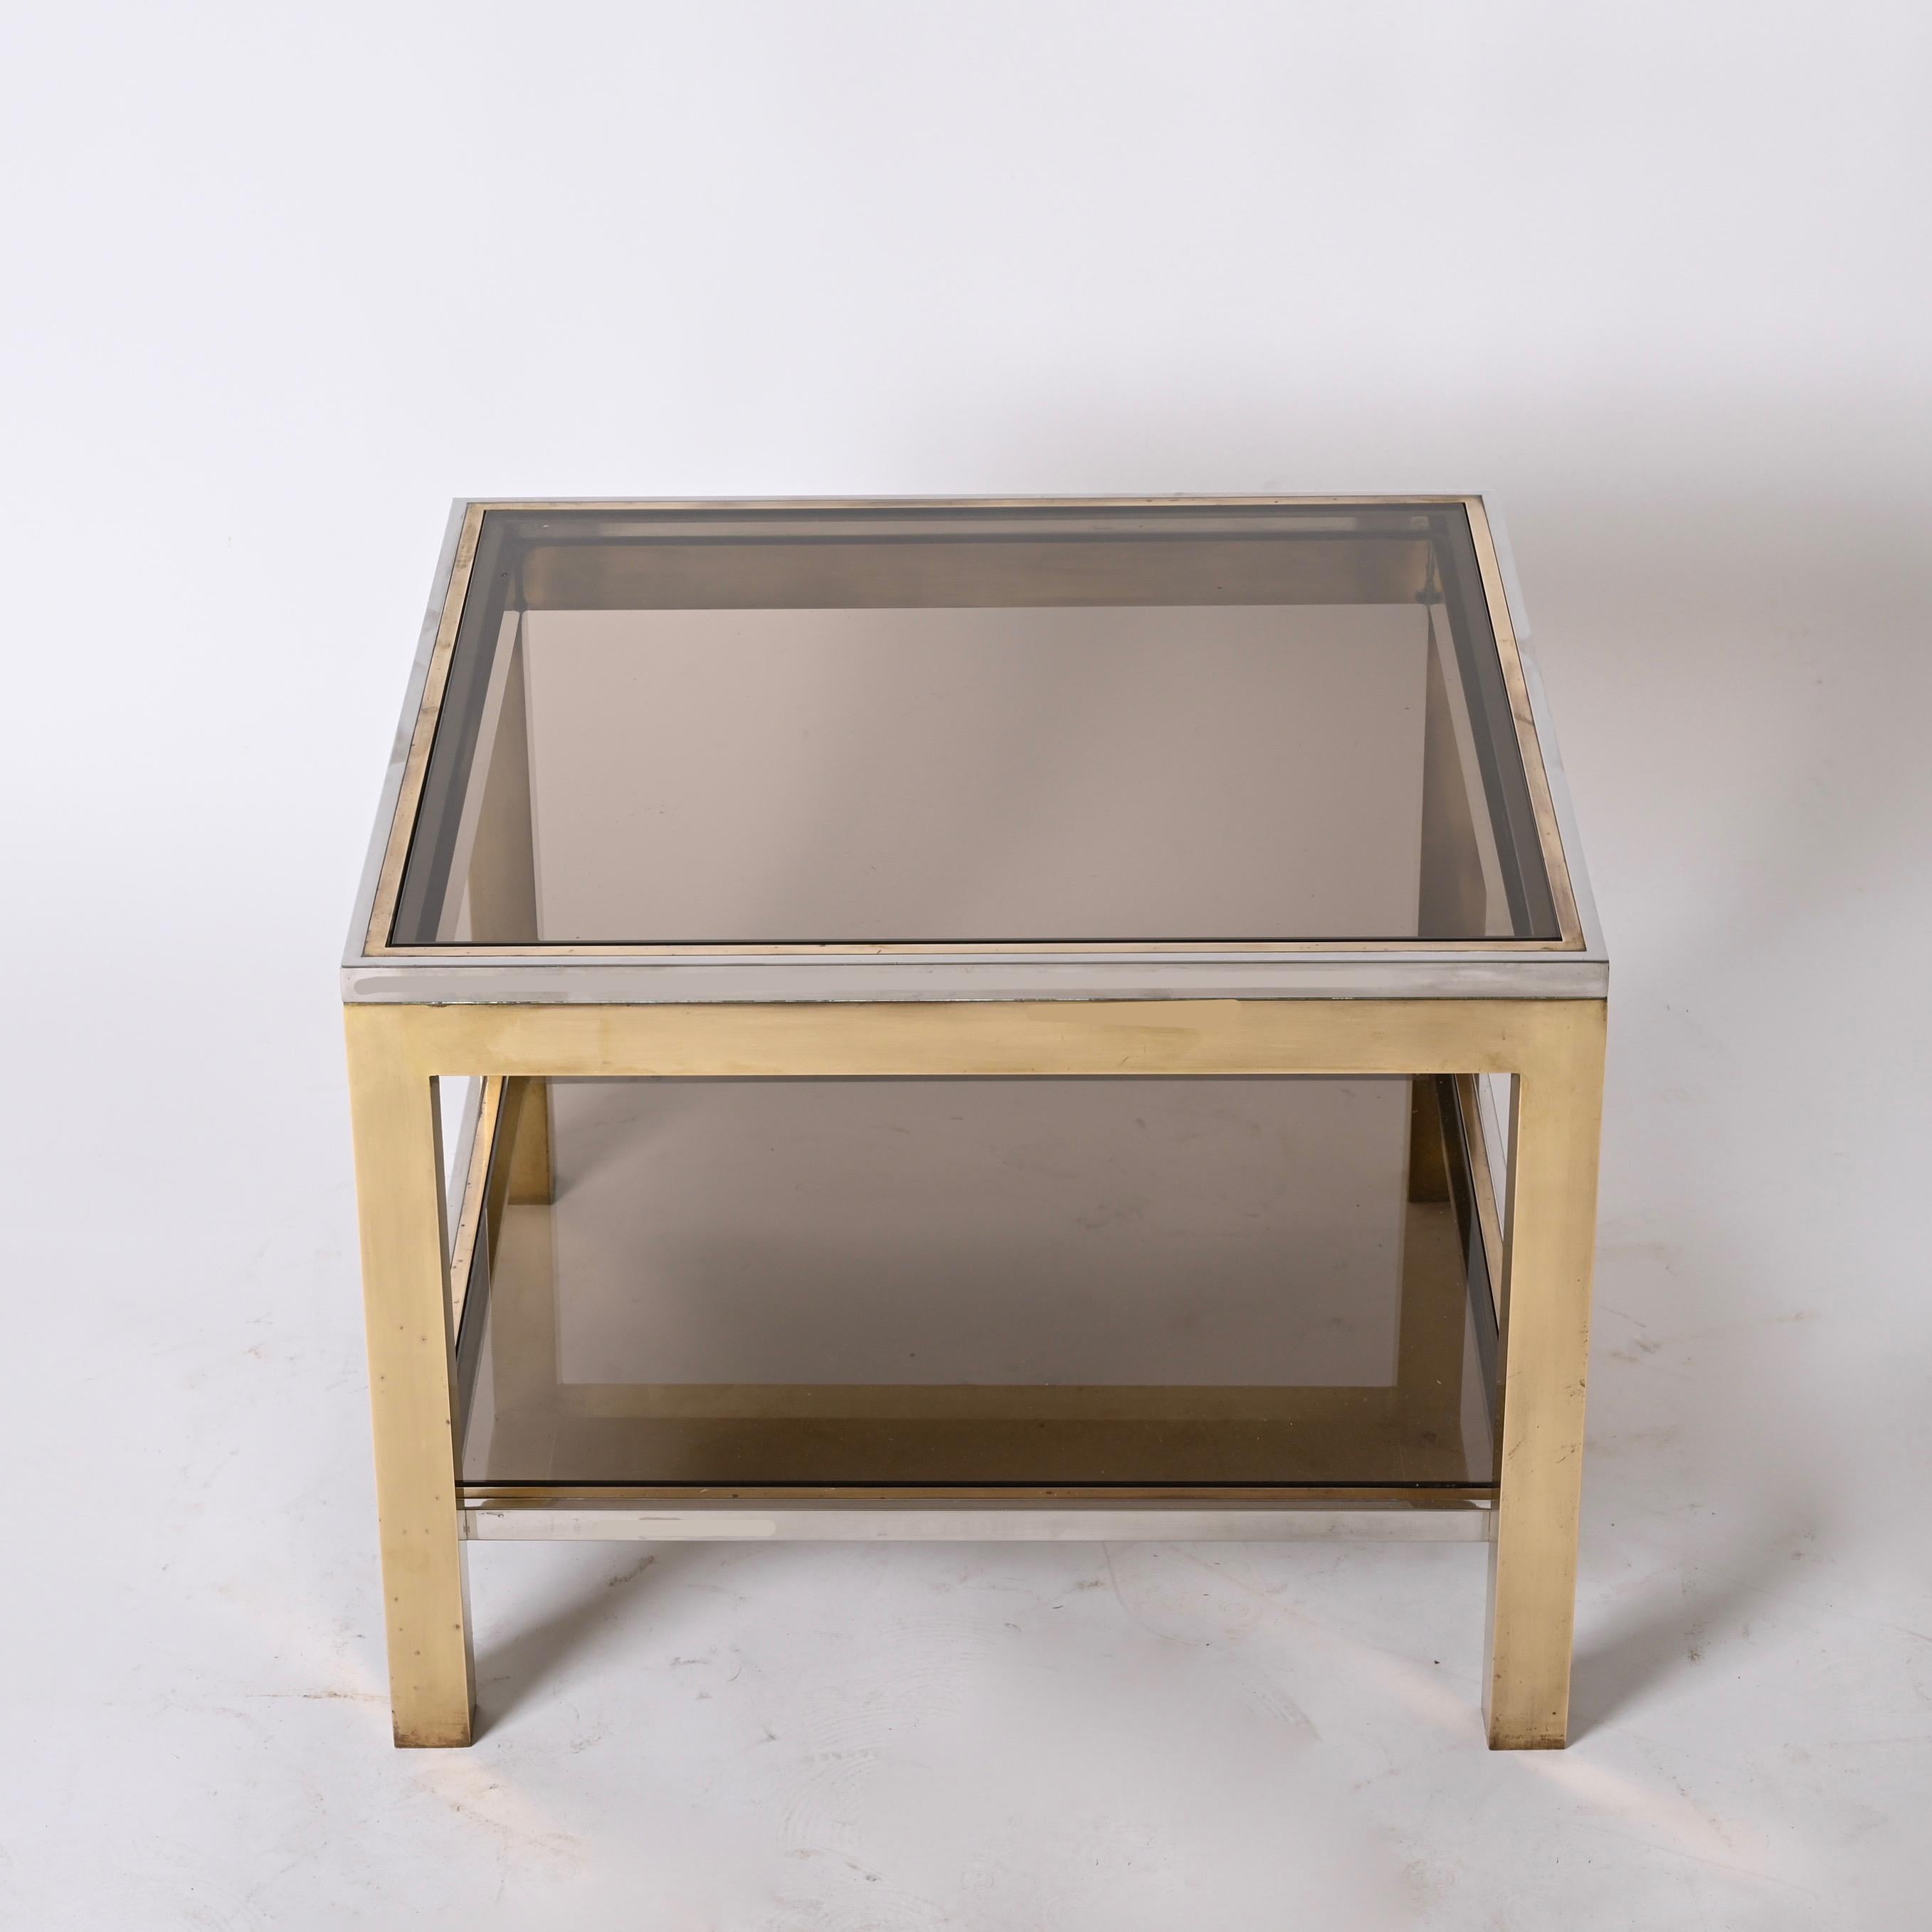 Amazing midcentury coffee table in chromed metal, brass and smoked glass. This wonderful piece was designed in the style of Romeo Rega in Italy during the 1970s.

The fusion of the three materials, chromed metal, brass and smoked glass, plus the